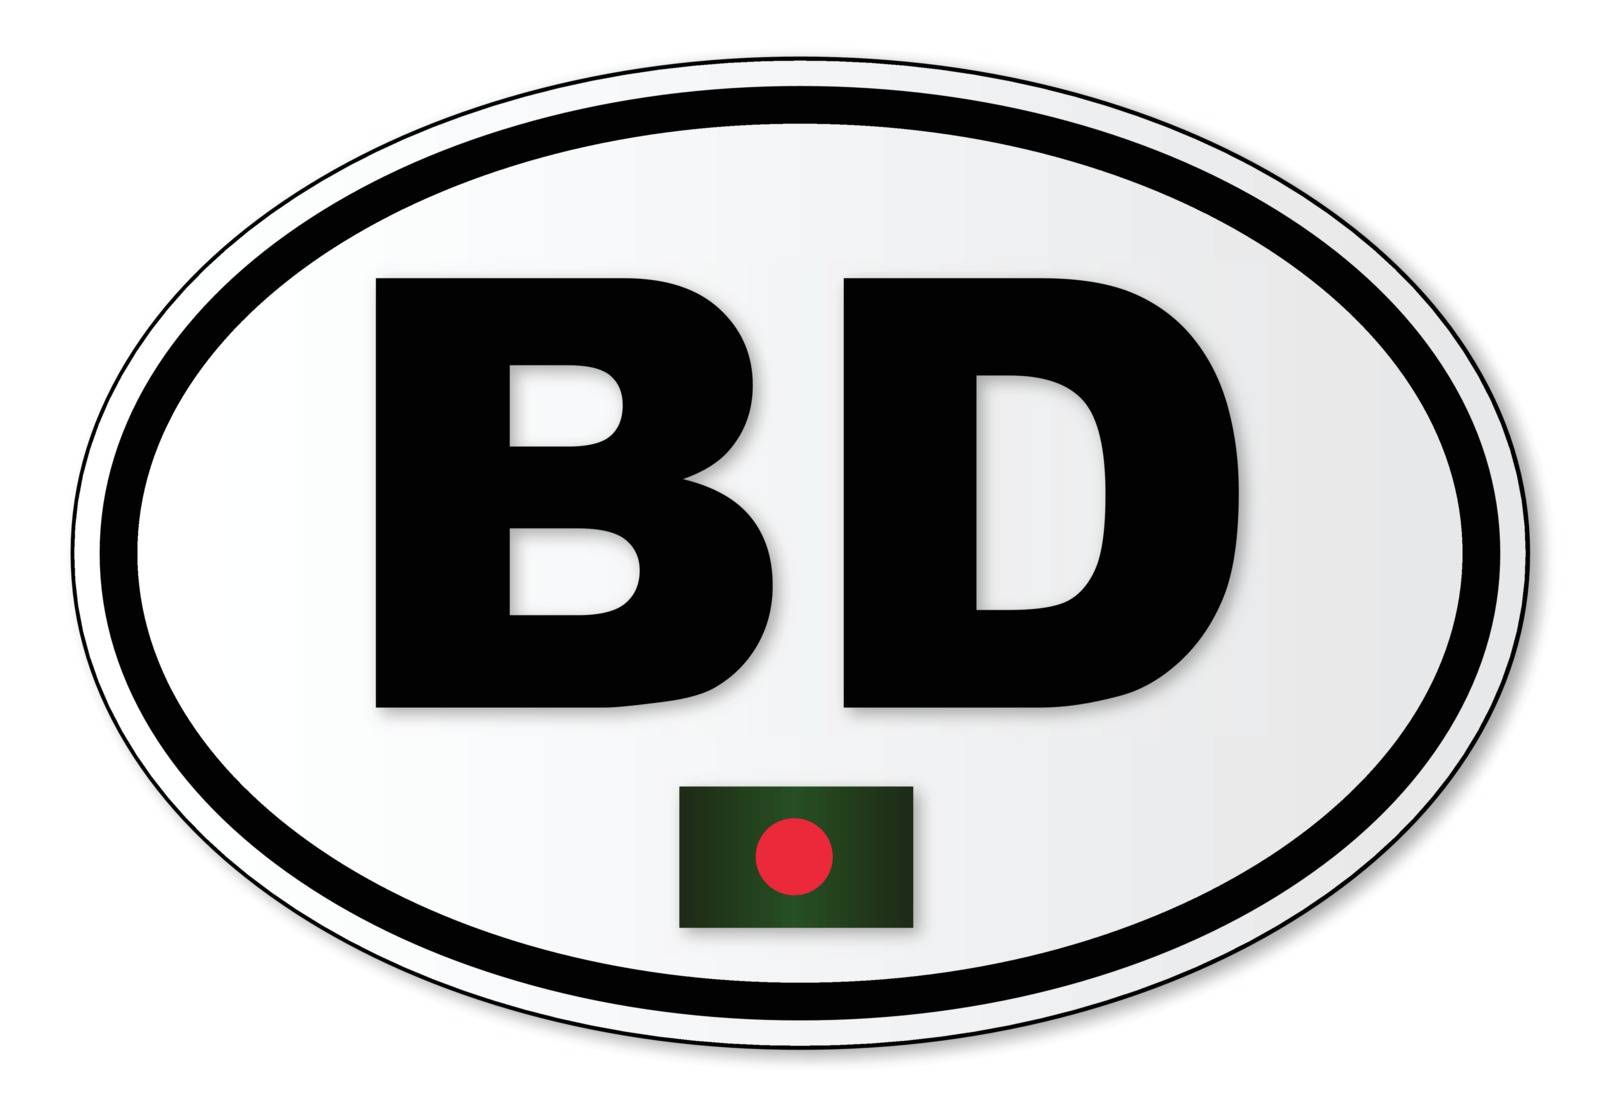 The BD plate attached to vehicles from Bangladesh traveling abroad